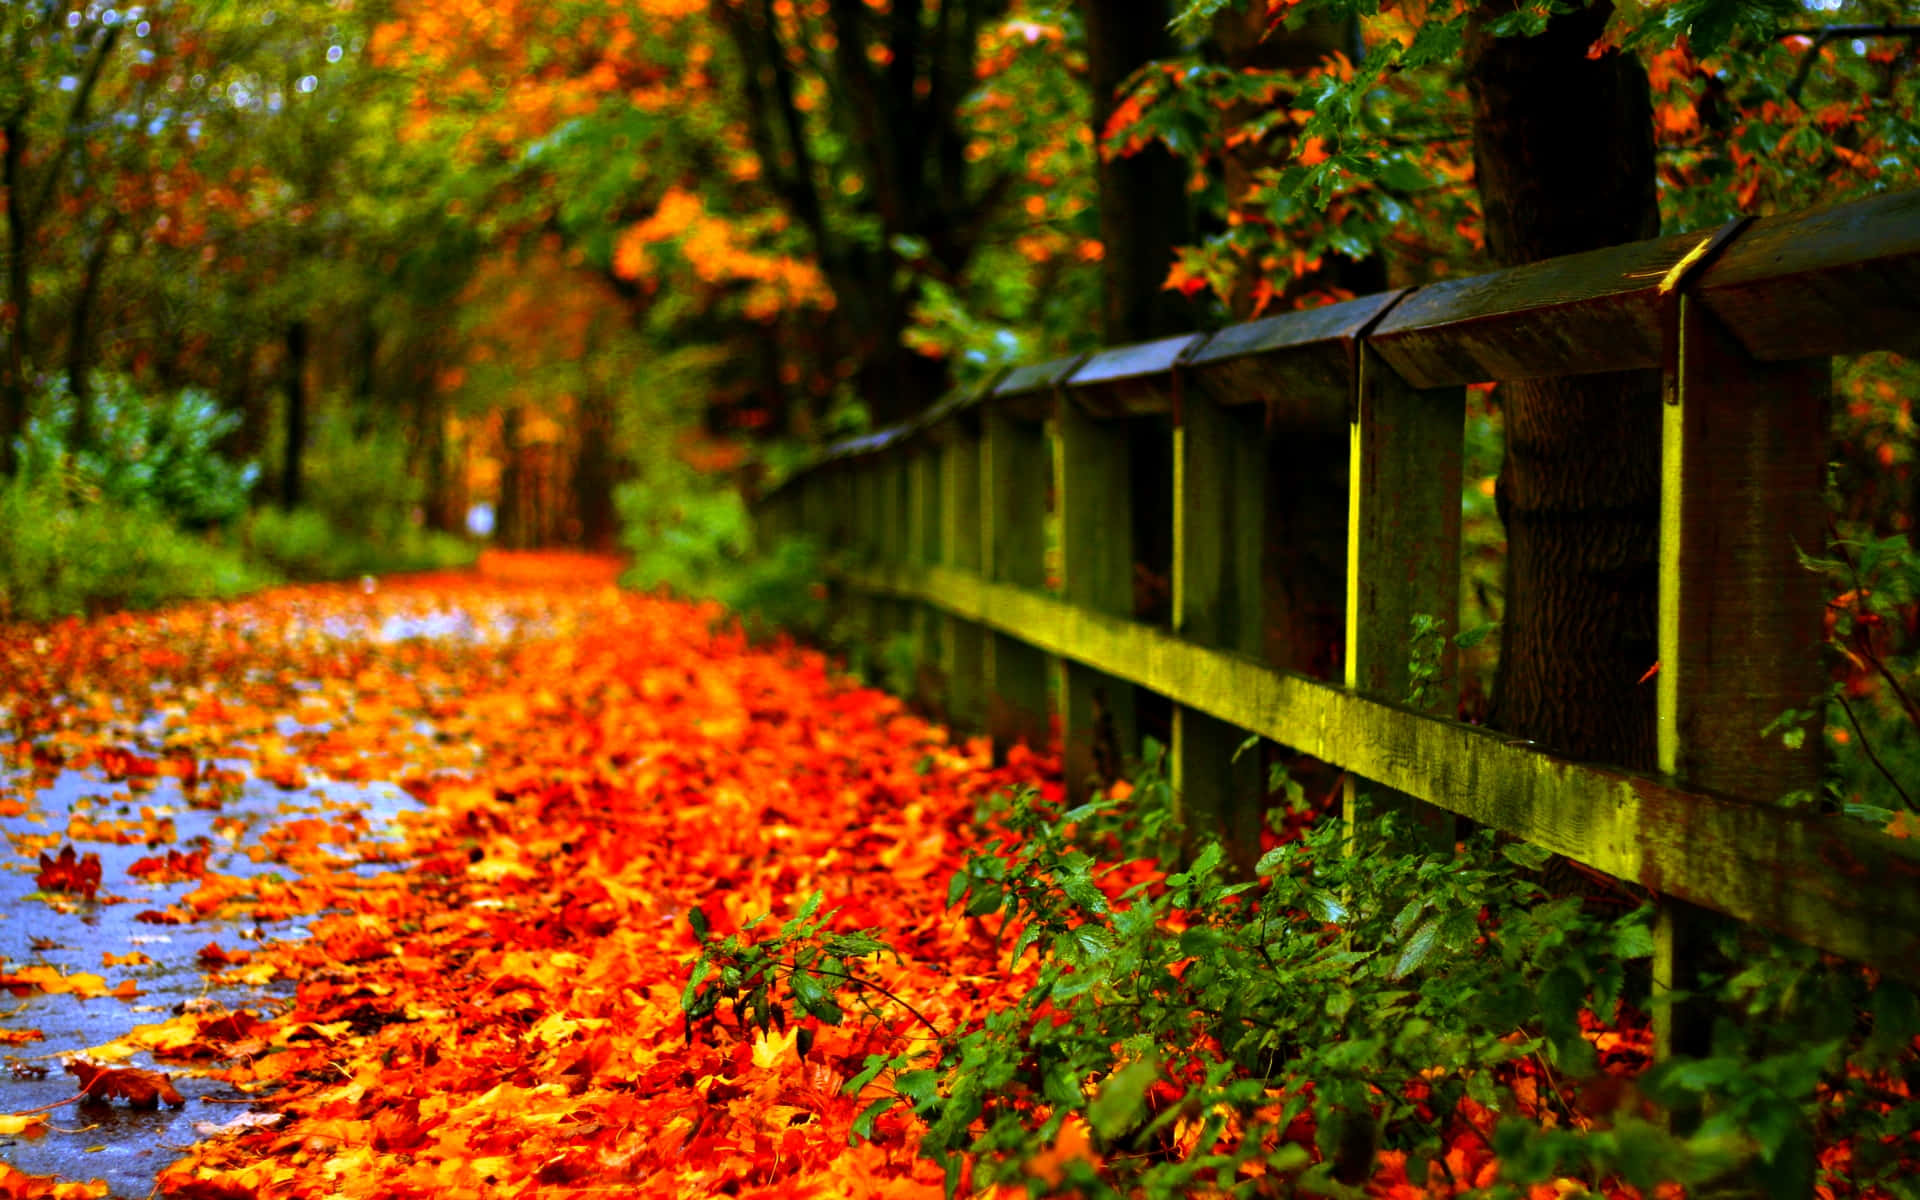 "Stunning Autumn Foliage in Colorful Profusion" Wallpaper